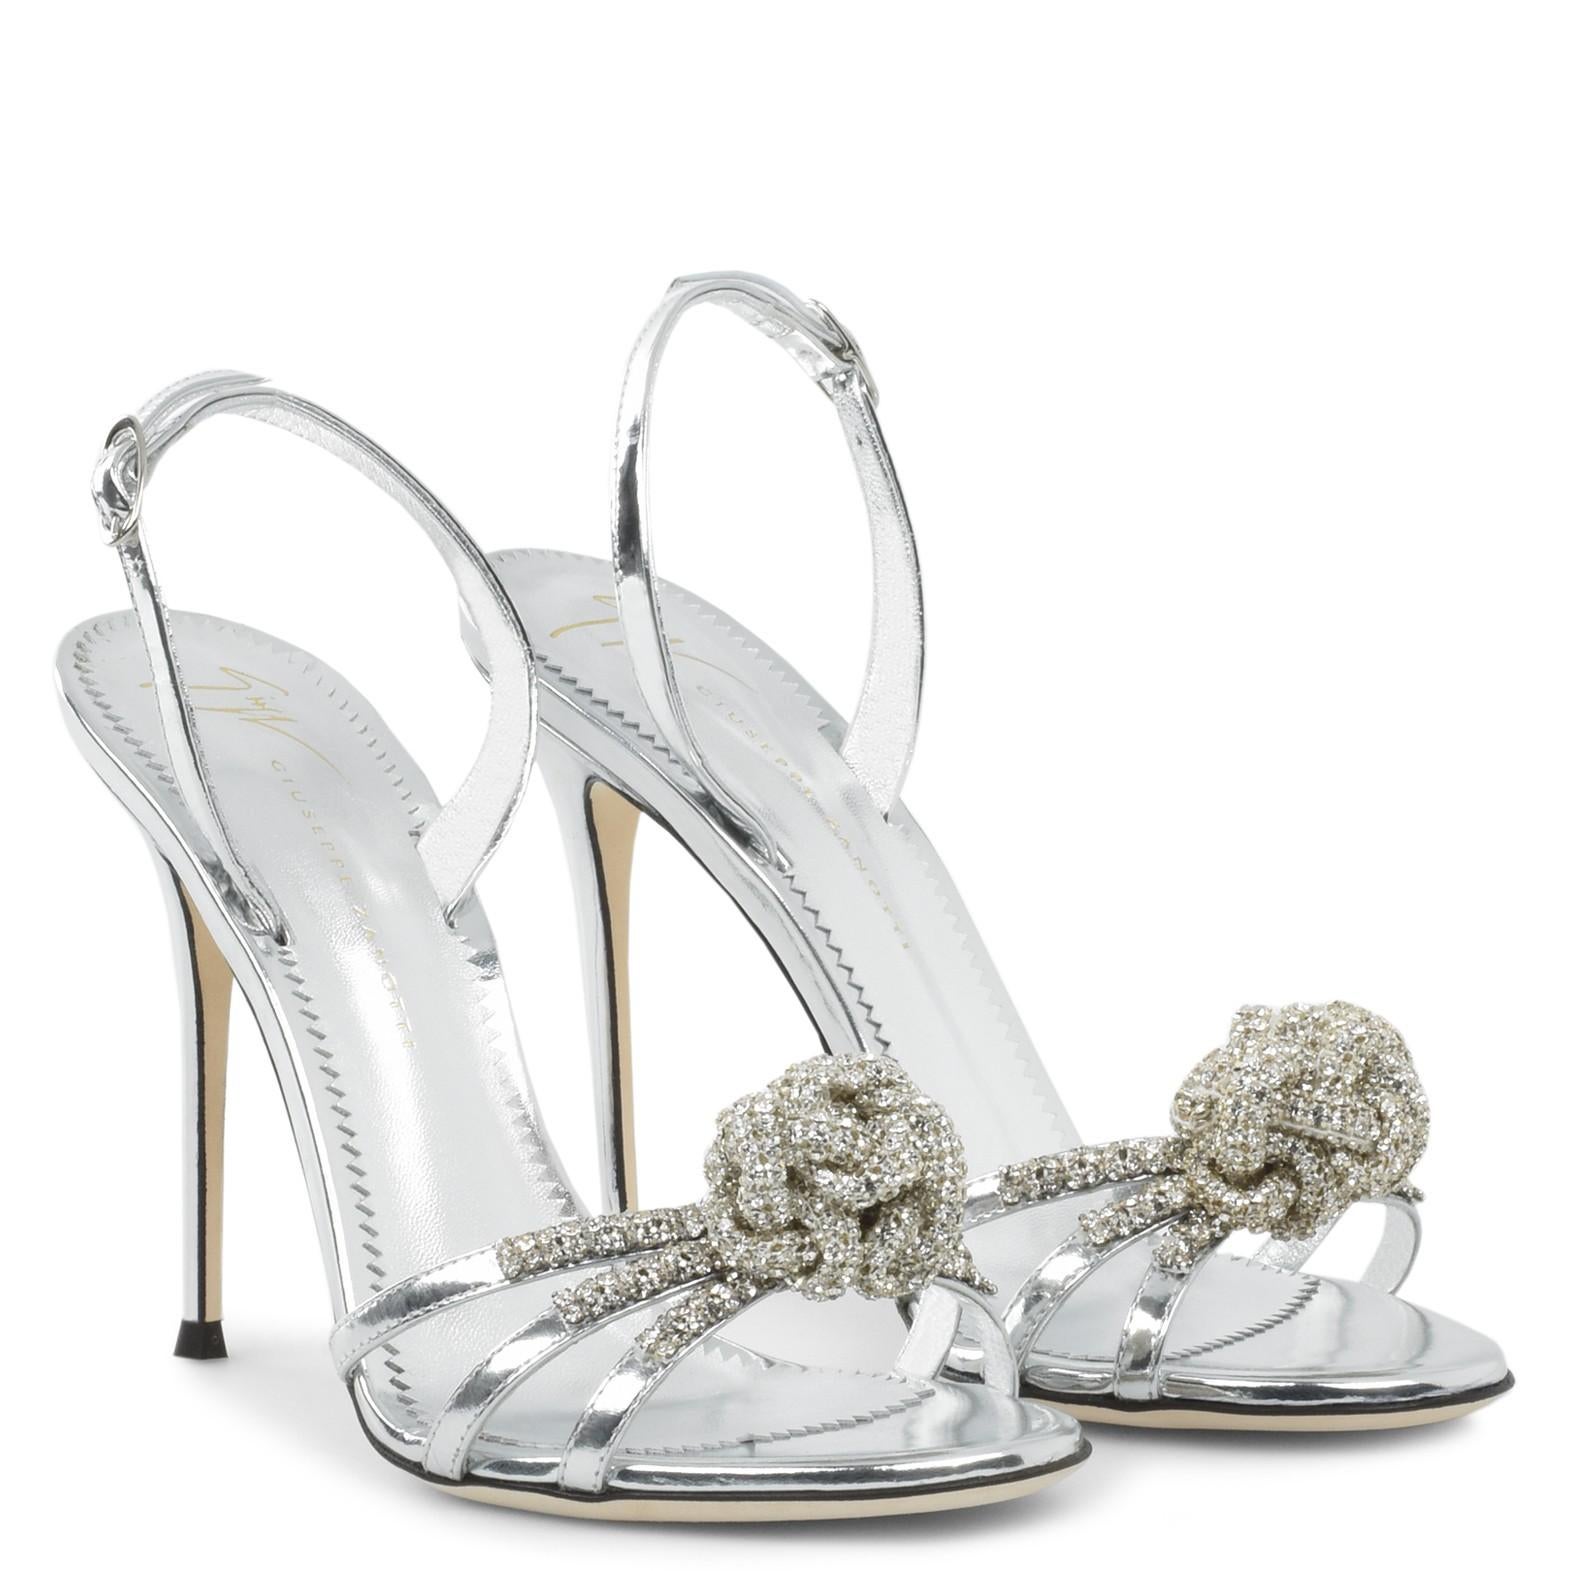 Giuseppe Zanotti NEW Silver Patent Leather Crystal Sandals Heels in Box

Size IT 36
Patent leather
Crystal
Ankle buckle closures
Made in Italy
Heel height 4.5